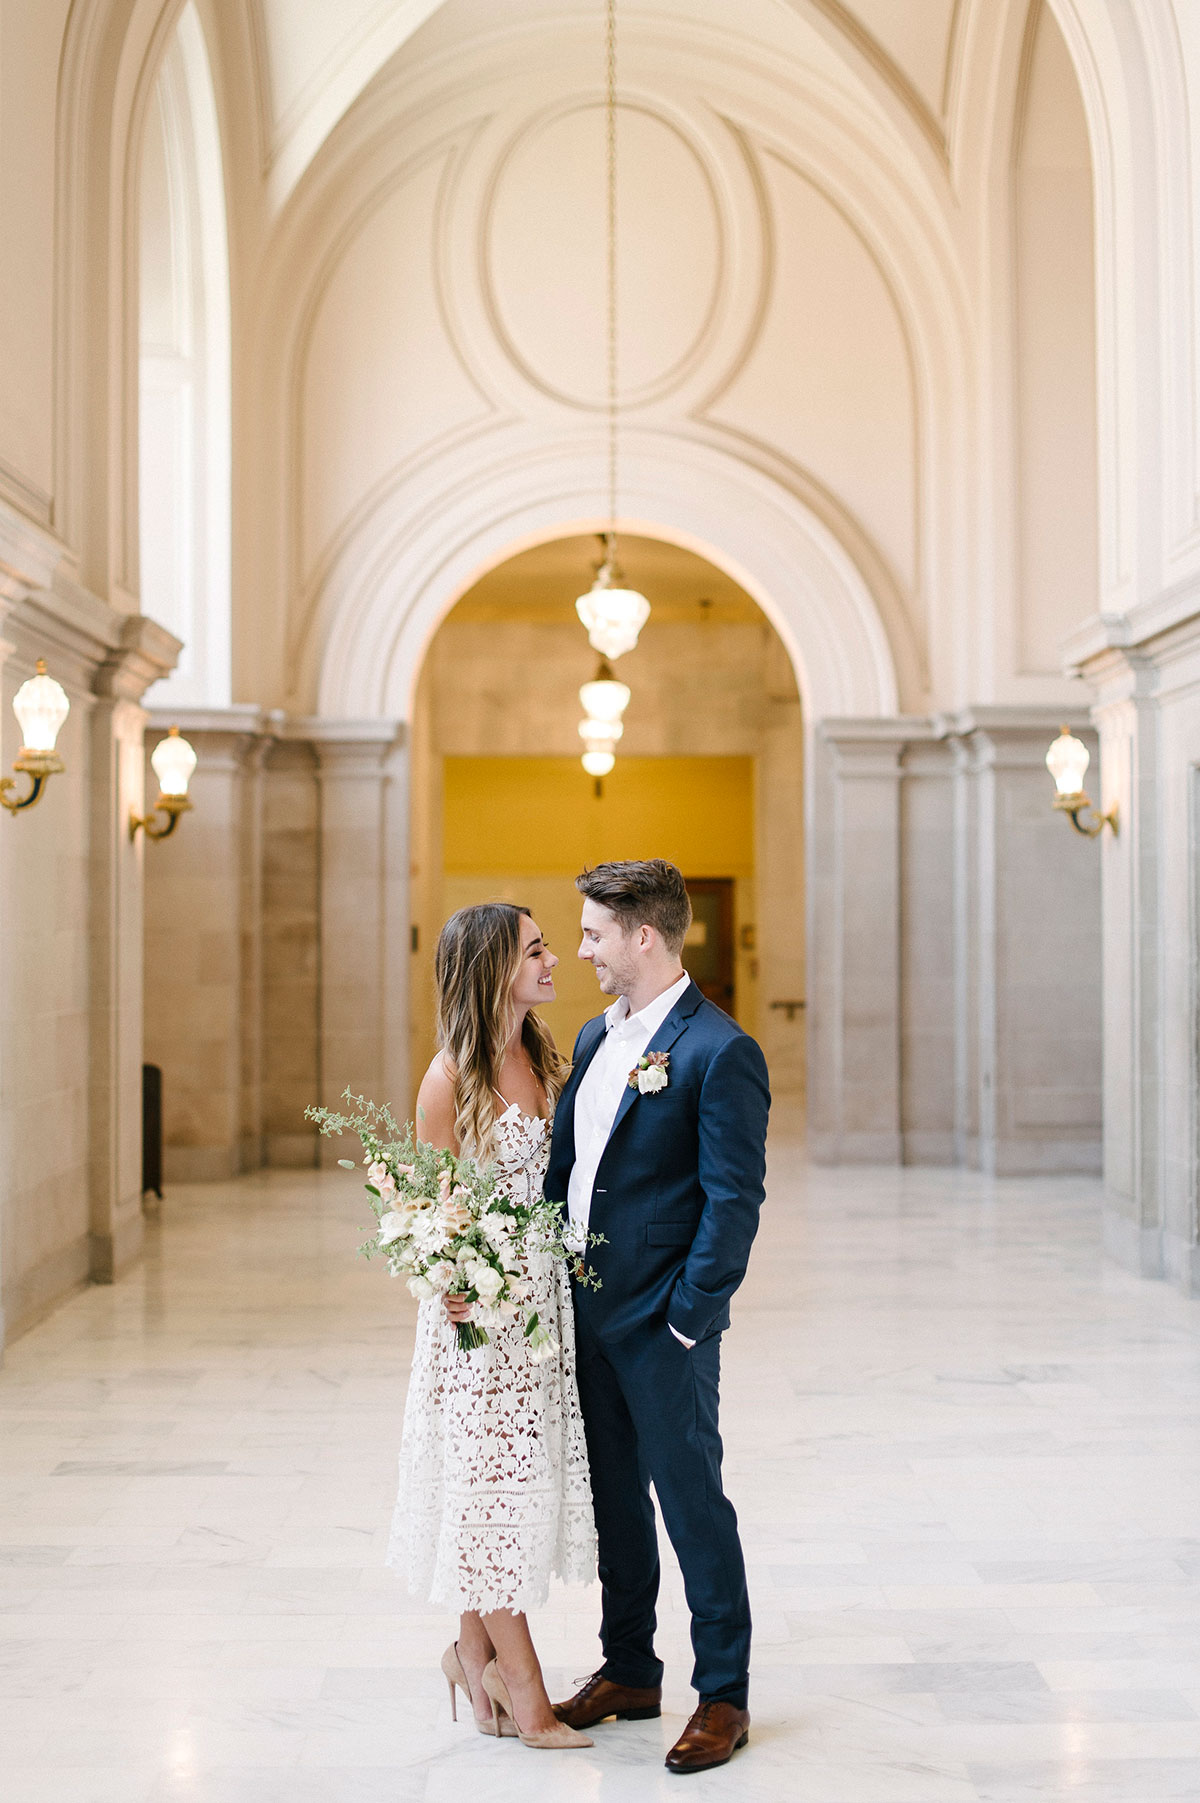 Civil Wedding Outfit Ideas to Marry In Style - My Sweet Engagement